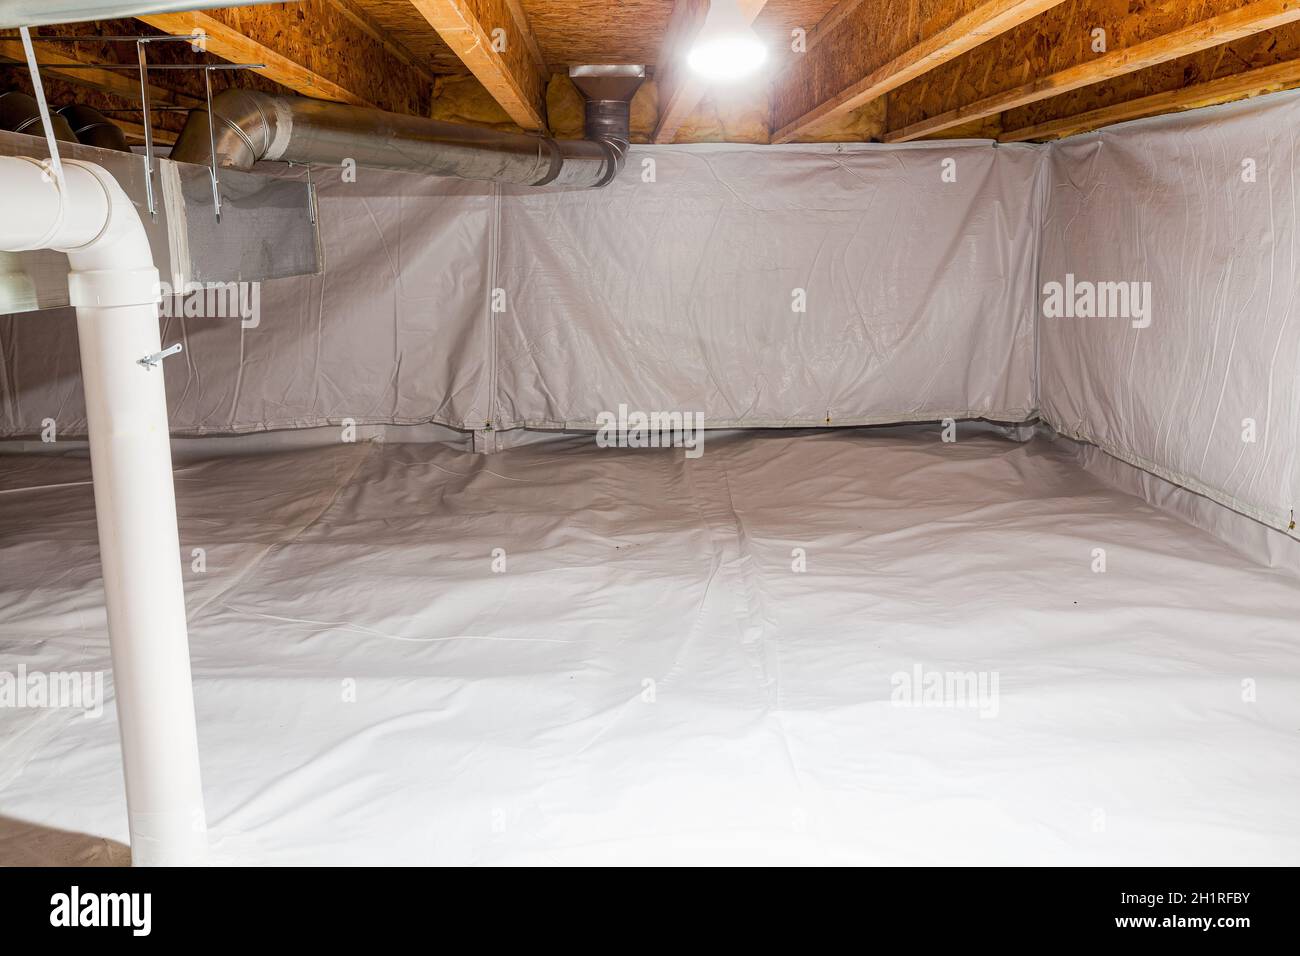 Crawl space fully encapsulated with thermoregulatory blankets and dimple board. Radon mitigation system pipes visible. Basement location for energy sa Stock Photo